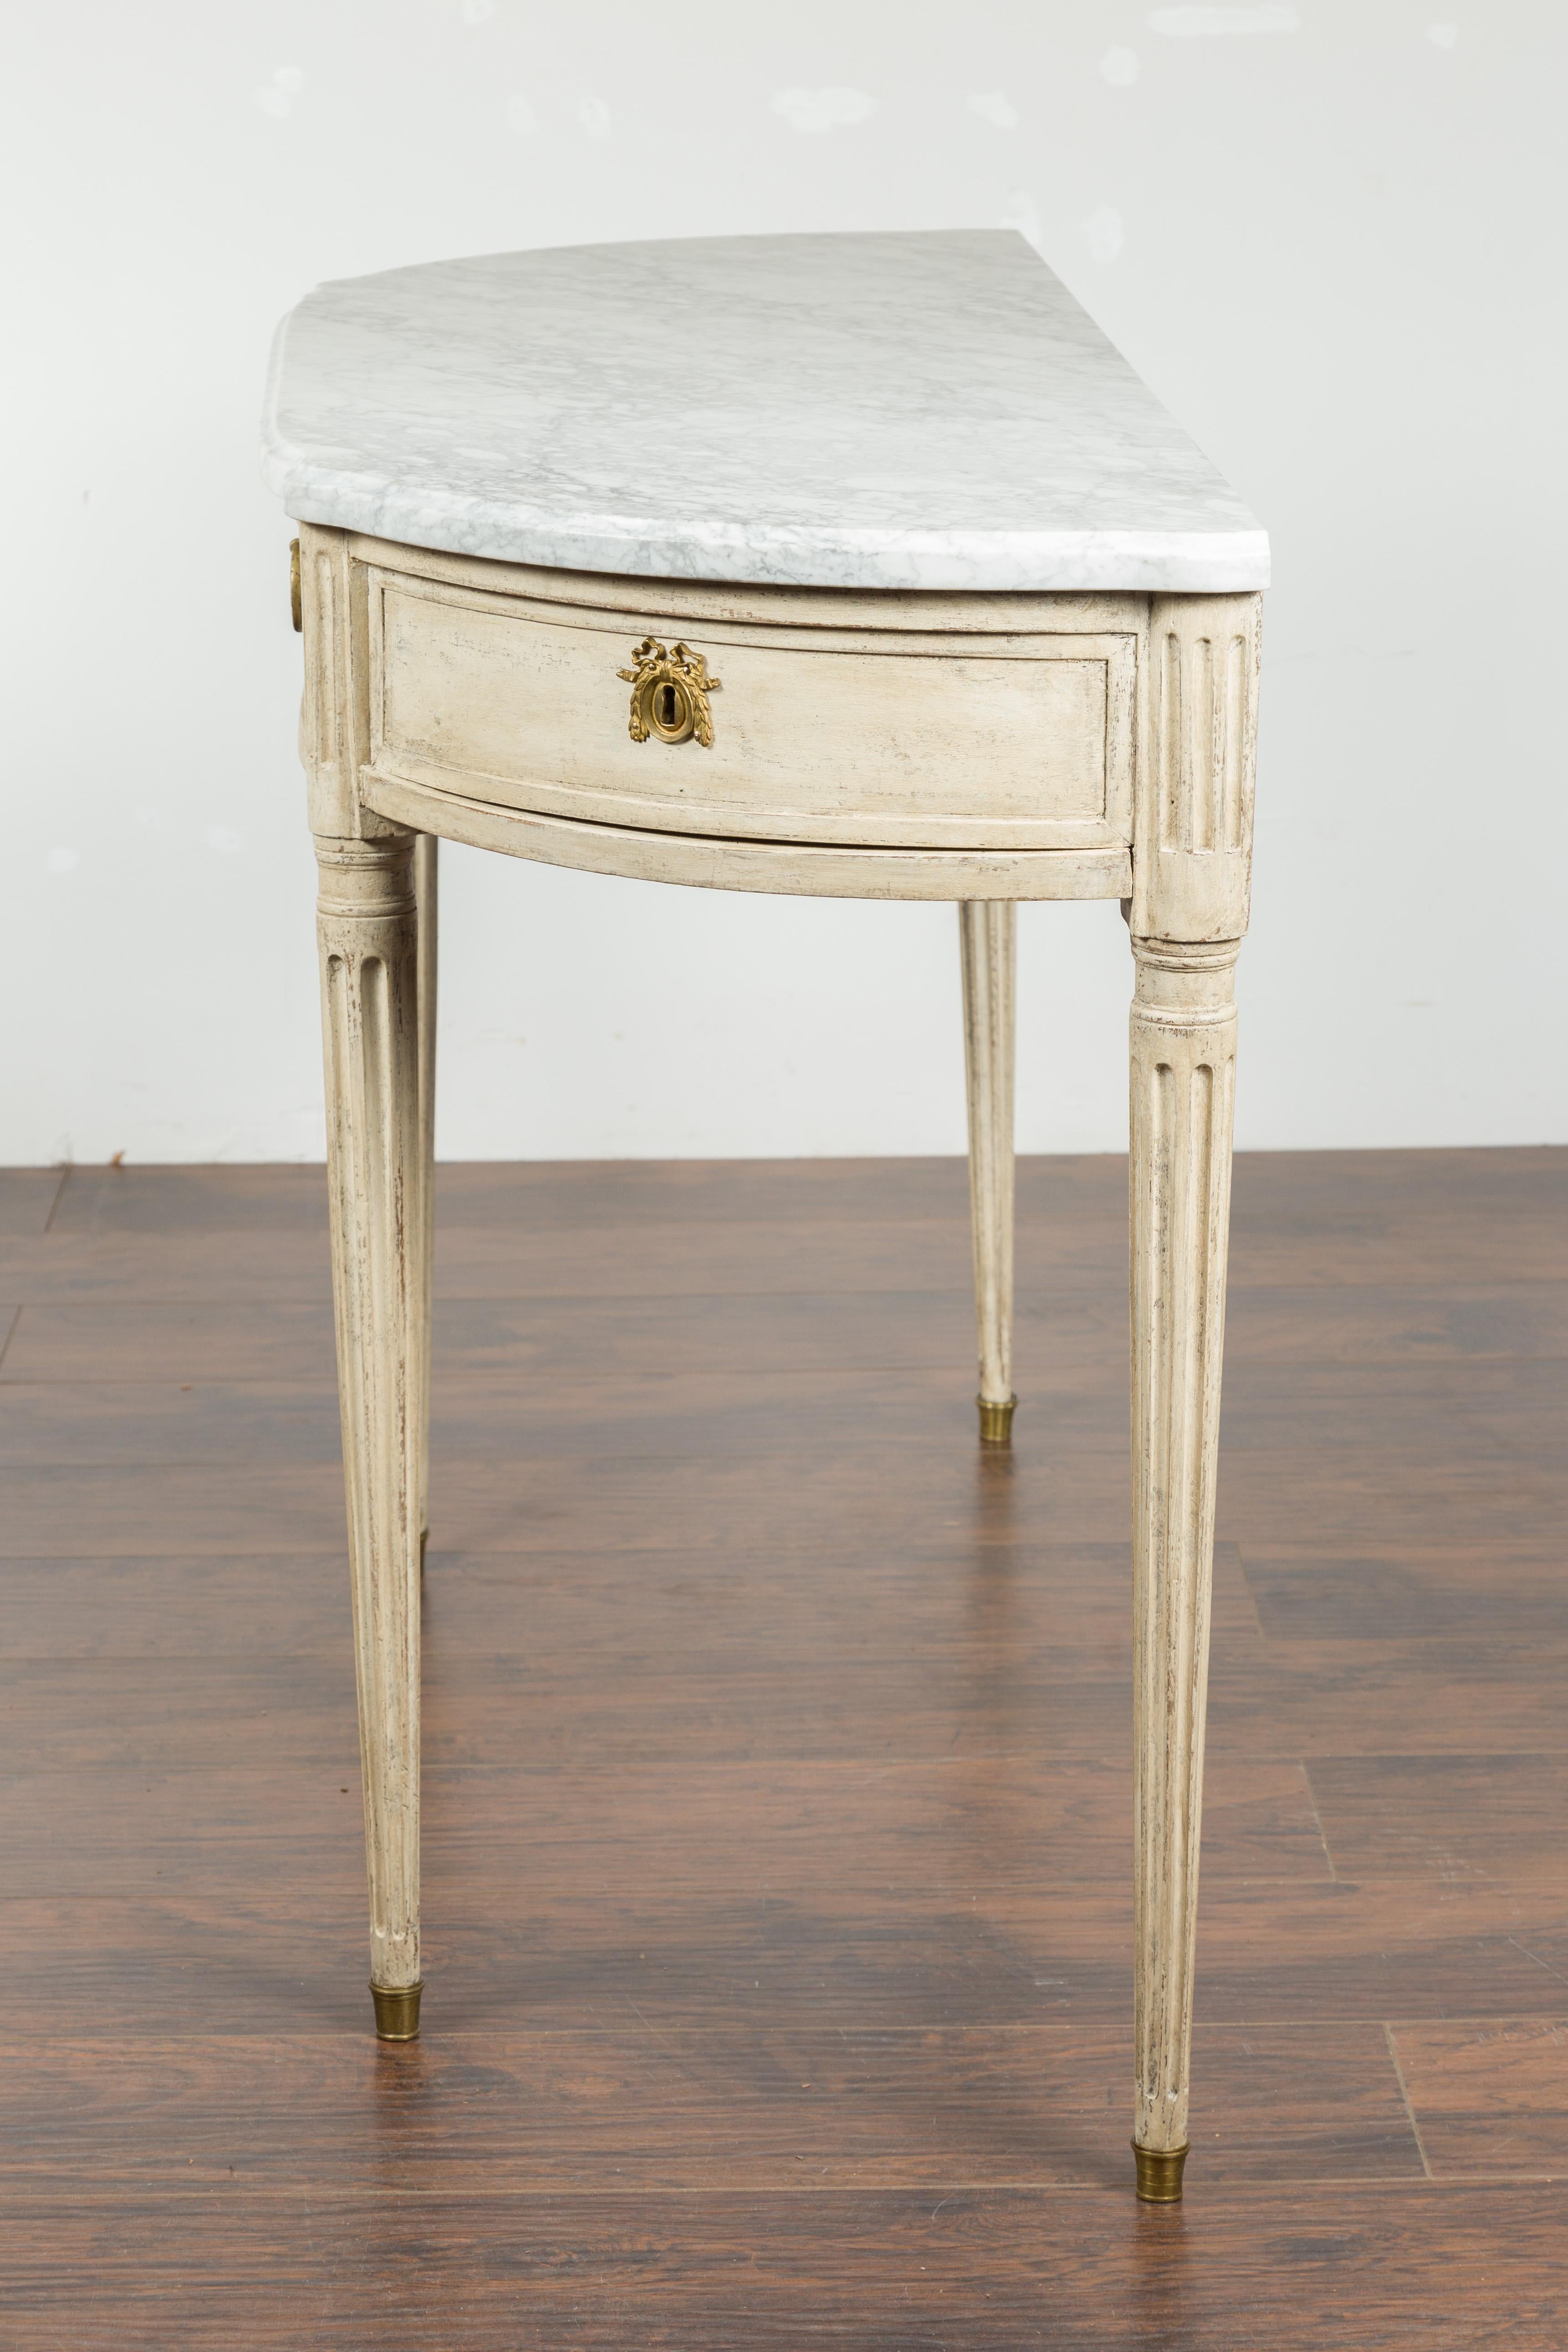 Pair of French 19th Century Neoclassical Style Demilune Tables with Marble Tops For Sale 16